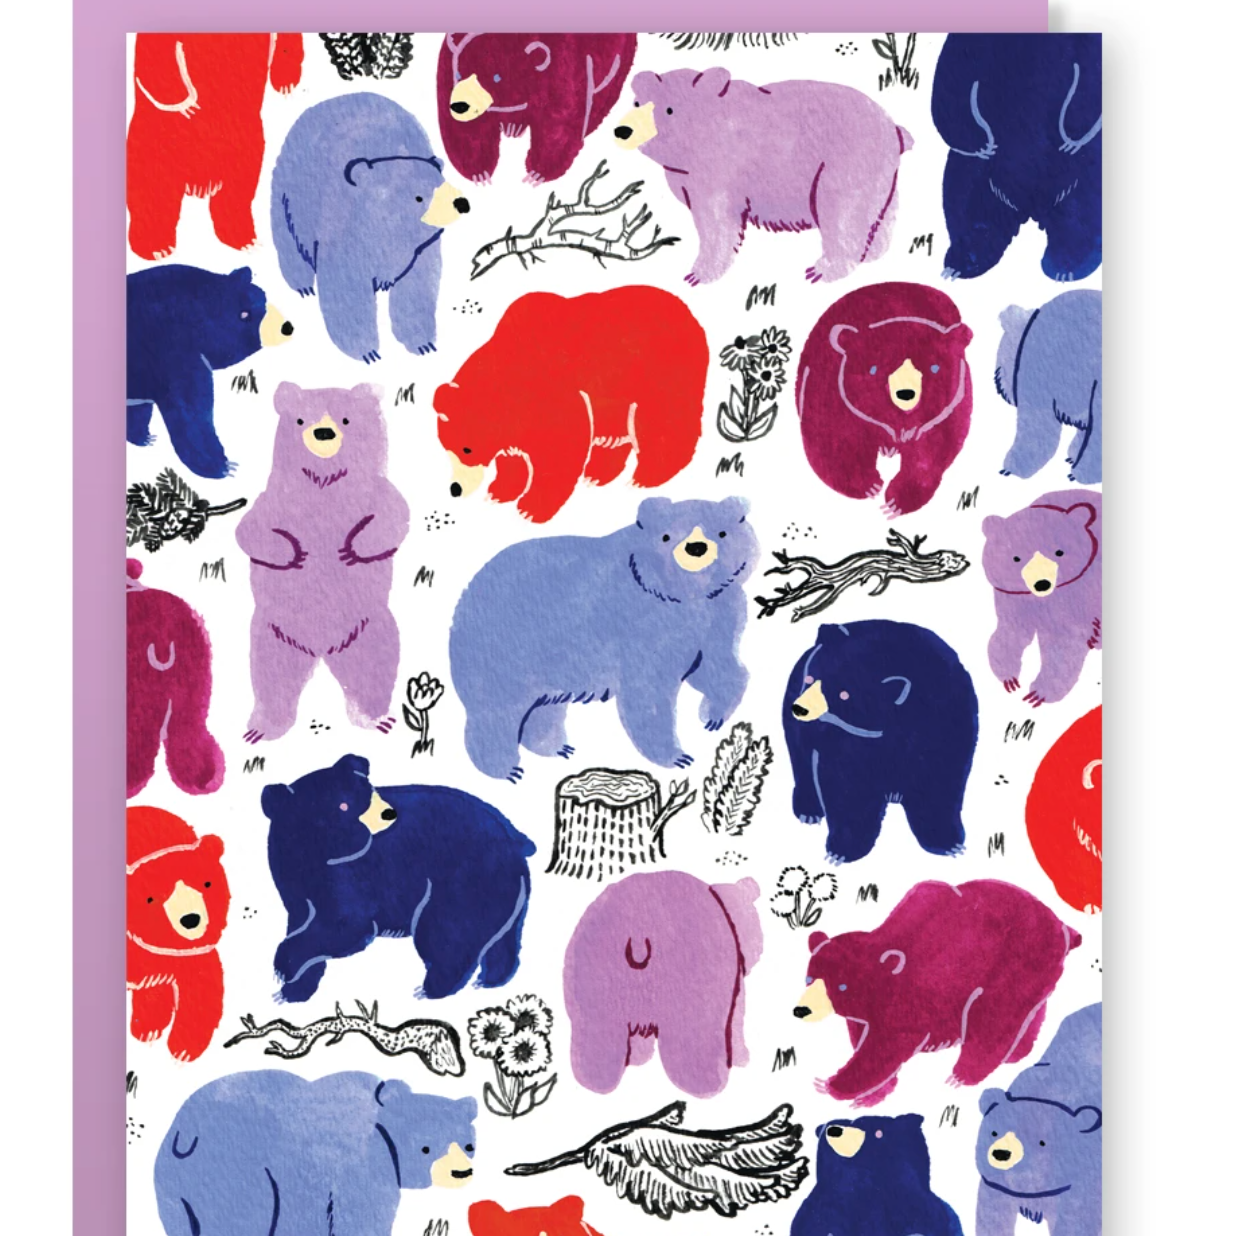 A greeting card based on a gouache painting in shades of purple and red. There are illustrated bears covering the card as well as some black and white drawings of flowers, tree stumps and sticks. 